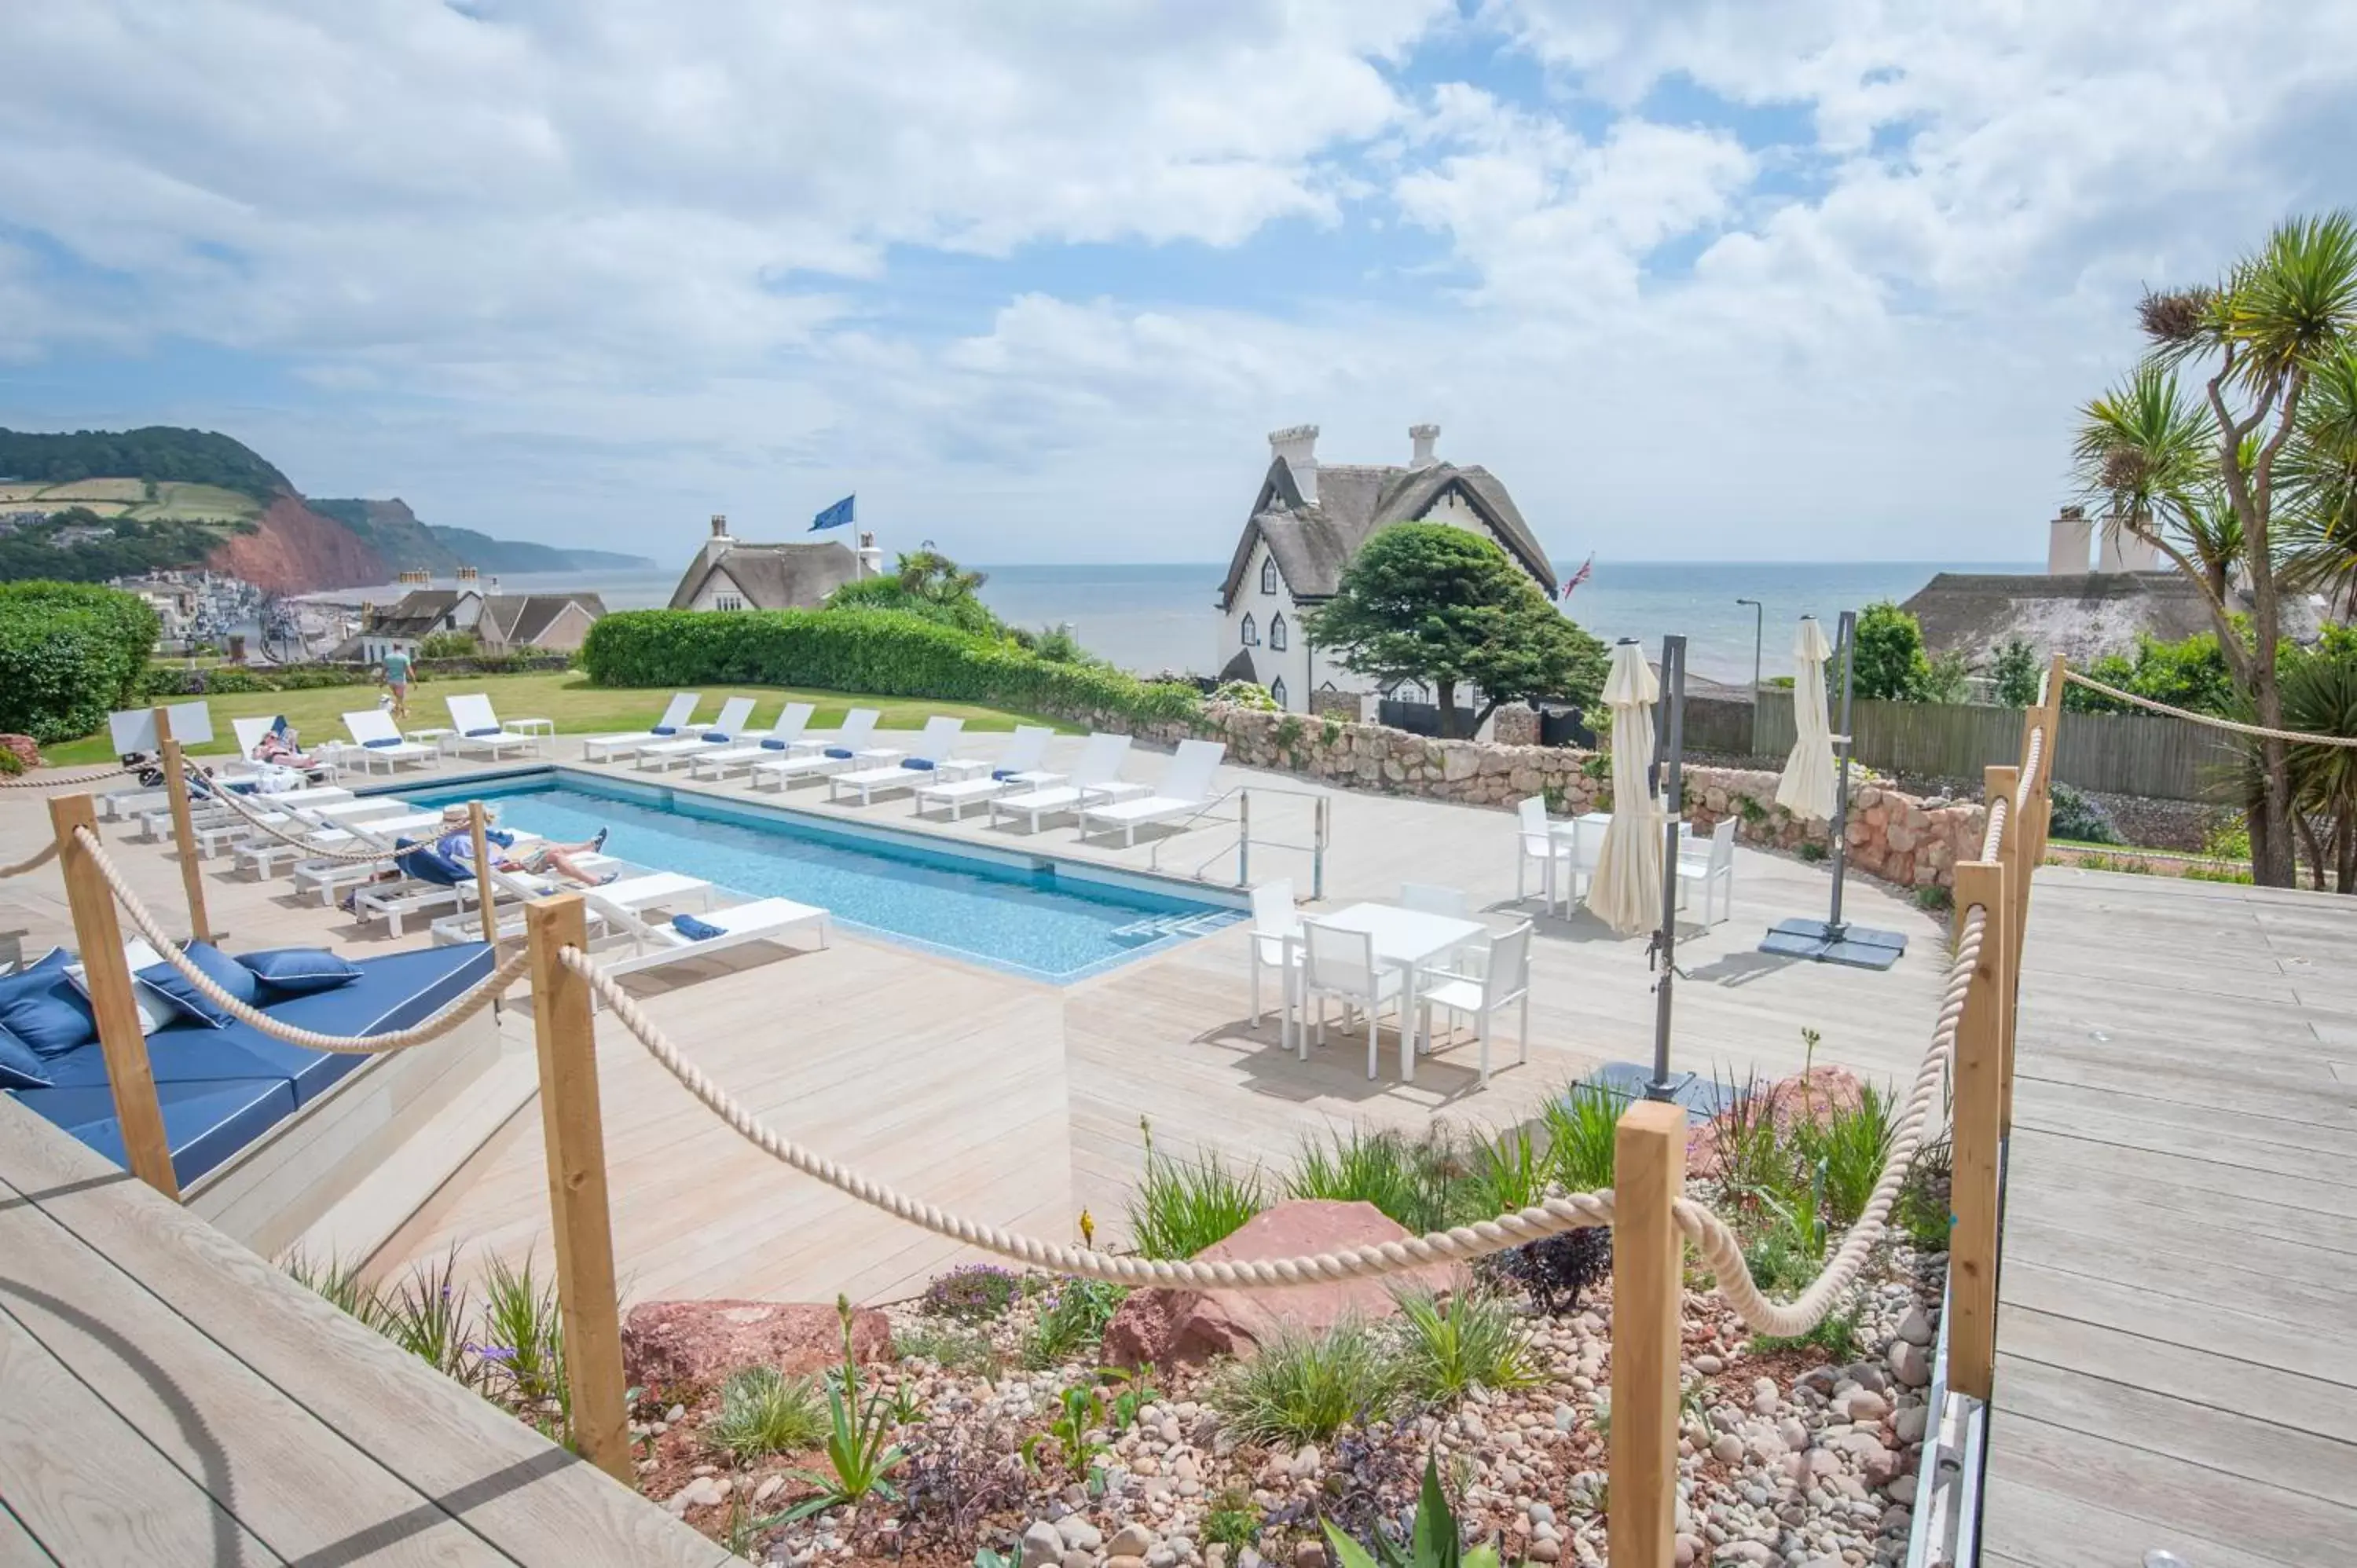 Swimming Pool in Harbour Hotel Sidmouth